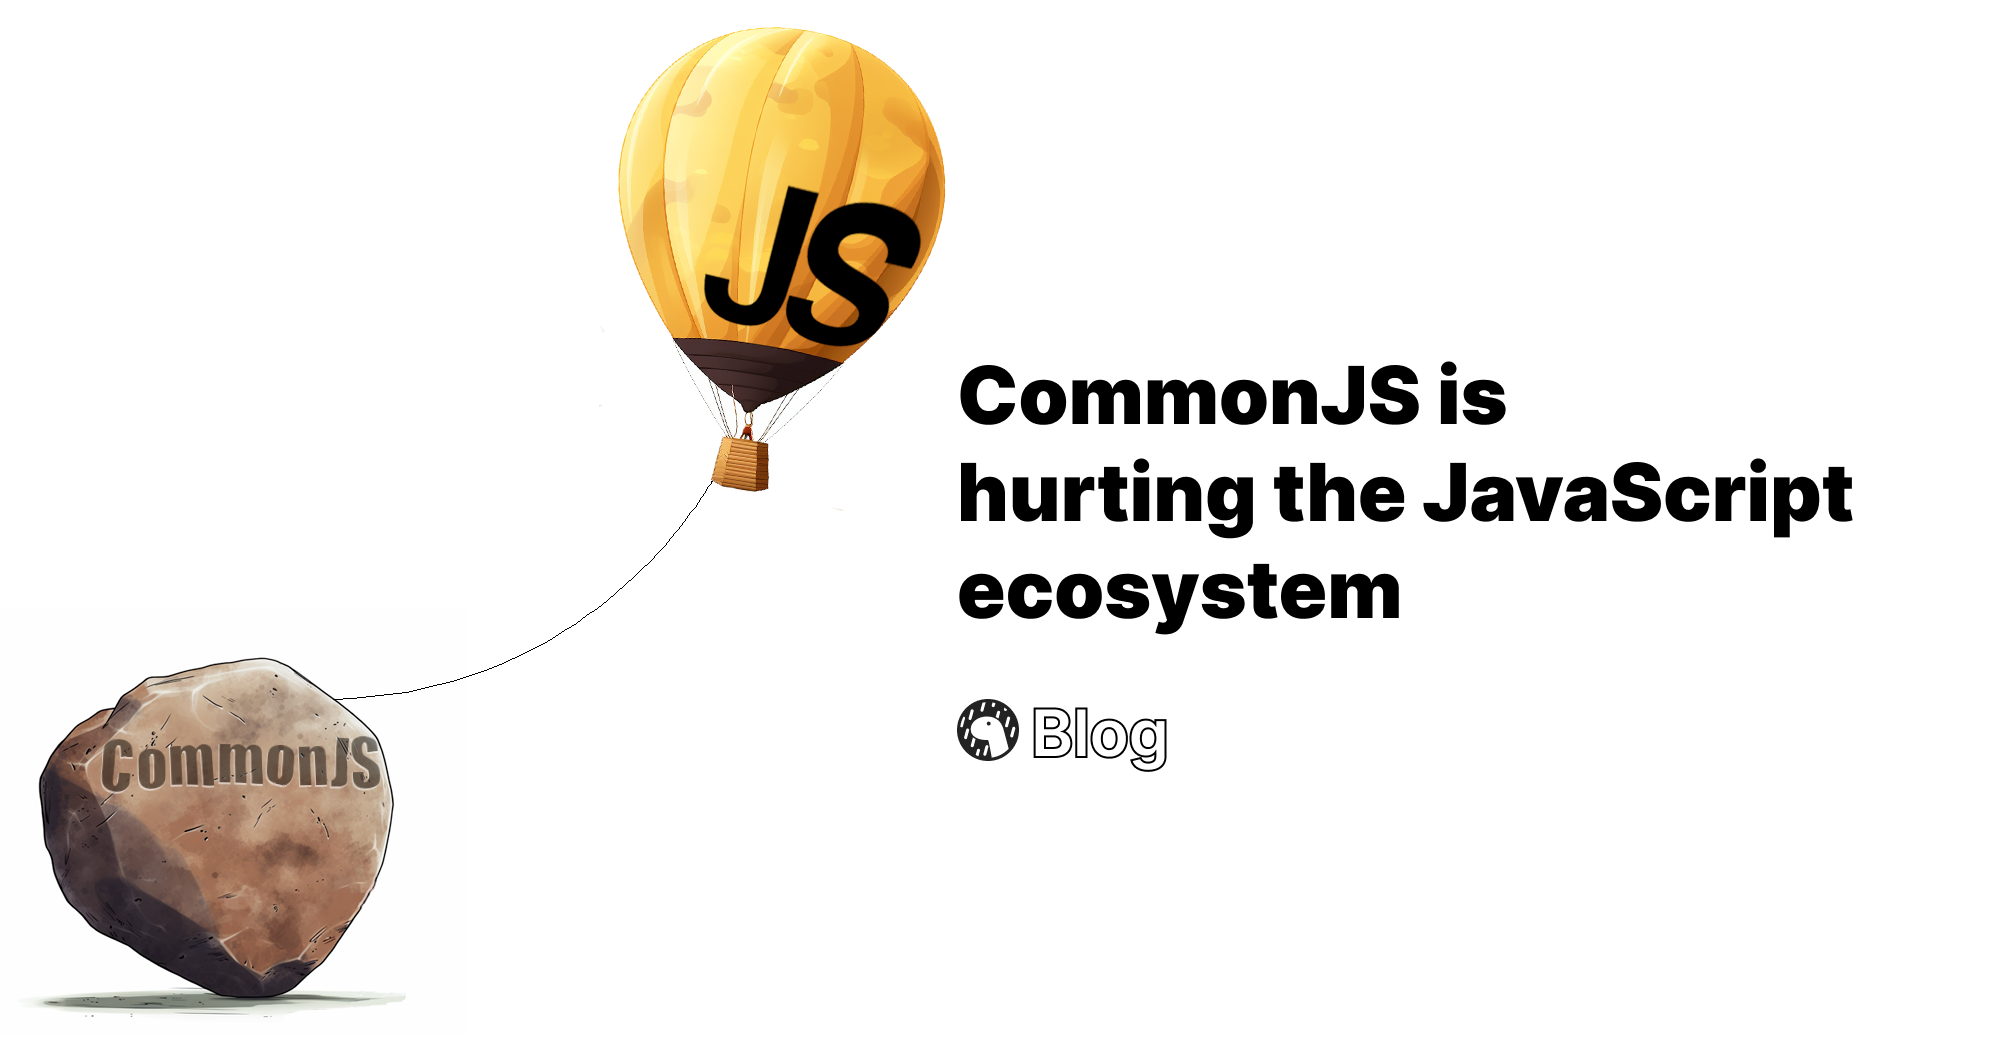 CommonJS is hurting JavaScript